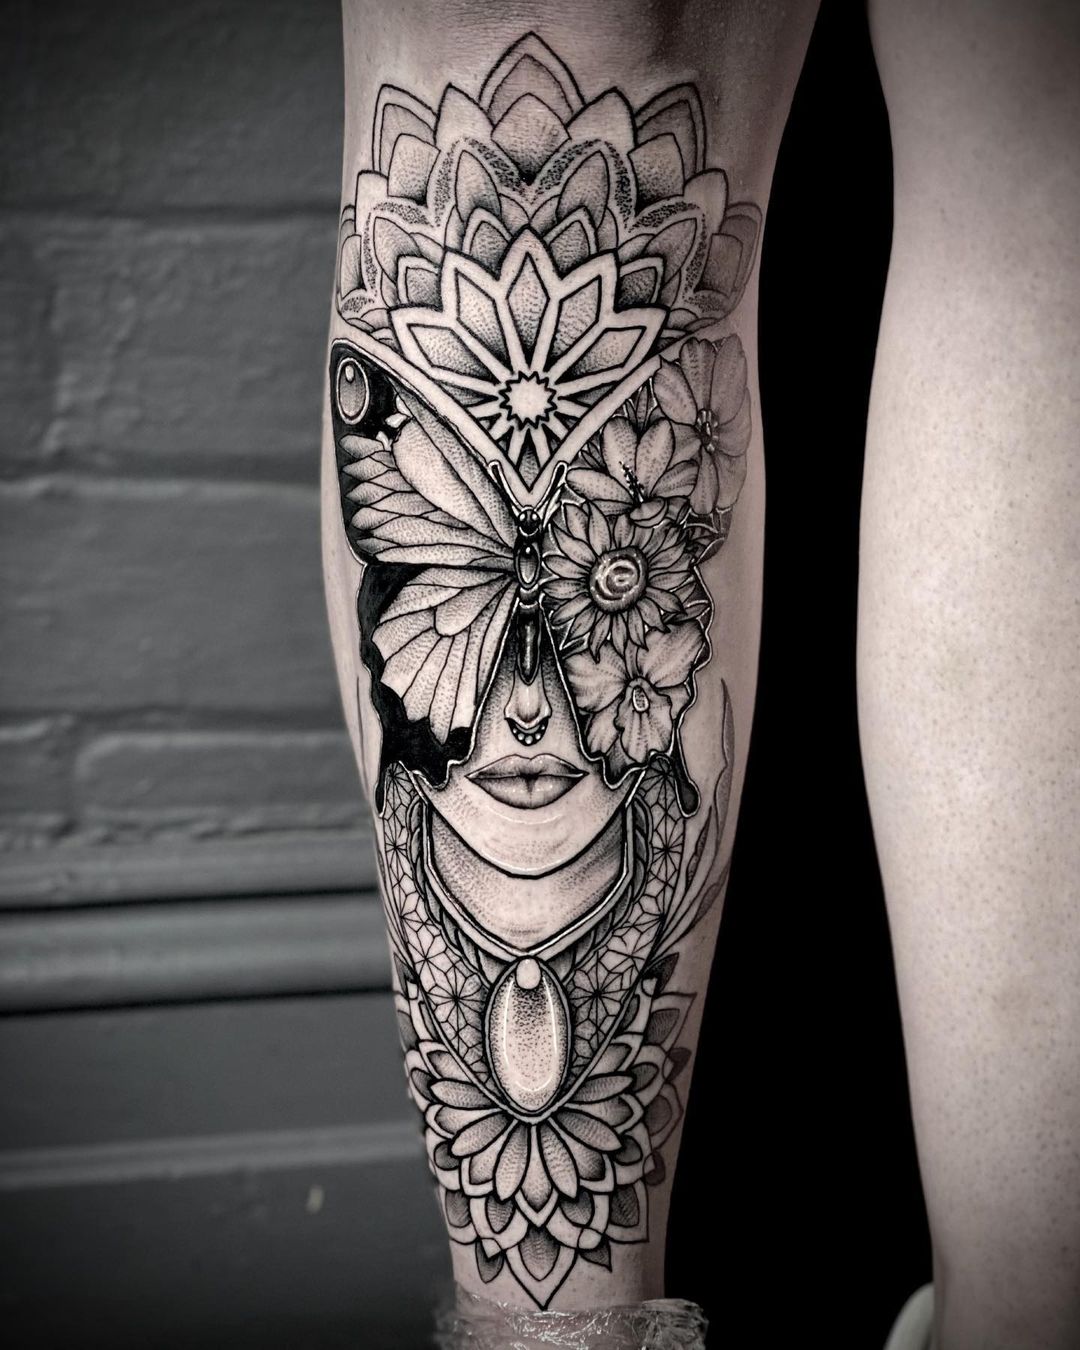 Mandala Tattoos  51 Brilliant Tattoos You Wish To Have  Meanings